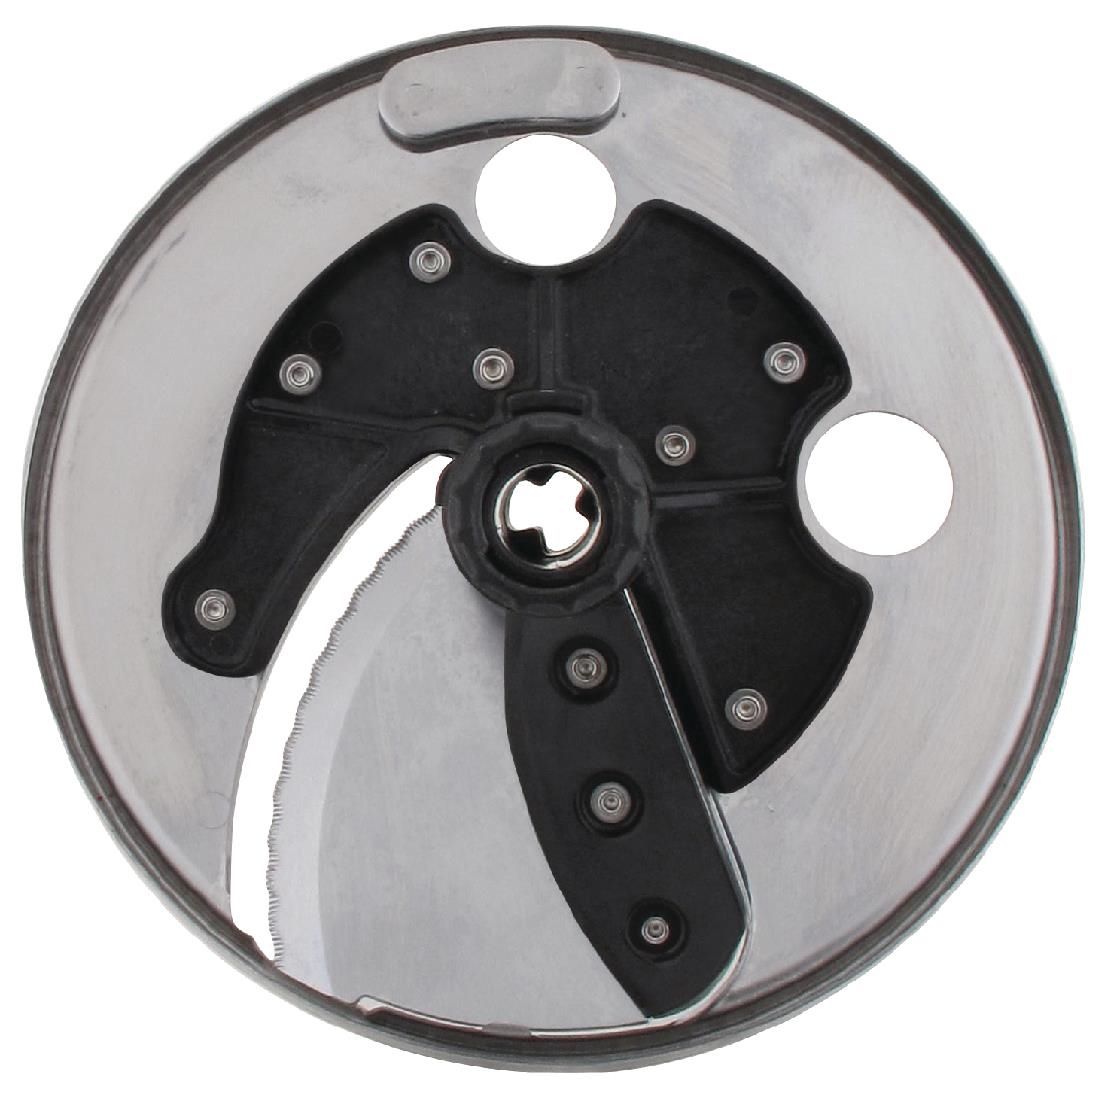 DM089 Waring 1mm to 6mm Adjustable Slicing Disc ref 032523 JD Catering Equipment Solutions Ltd